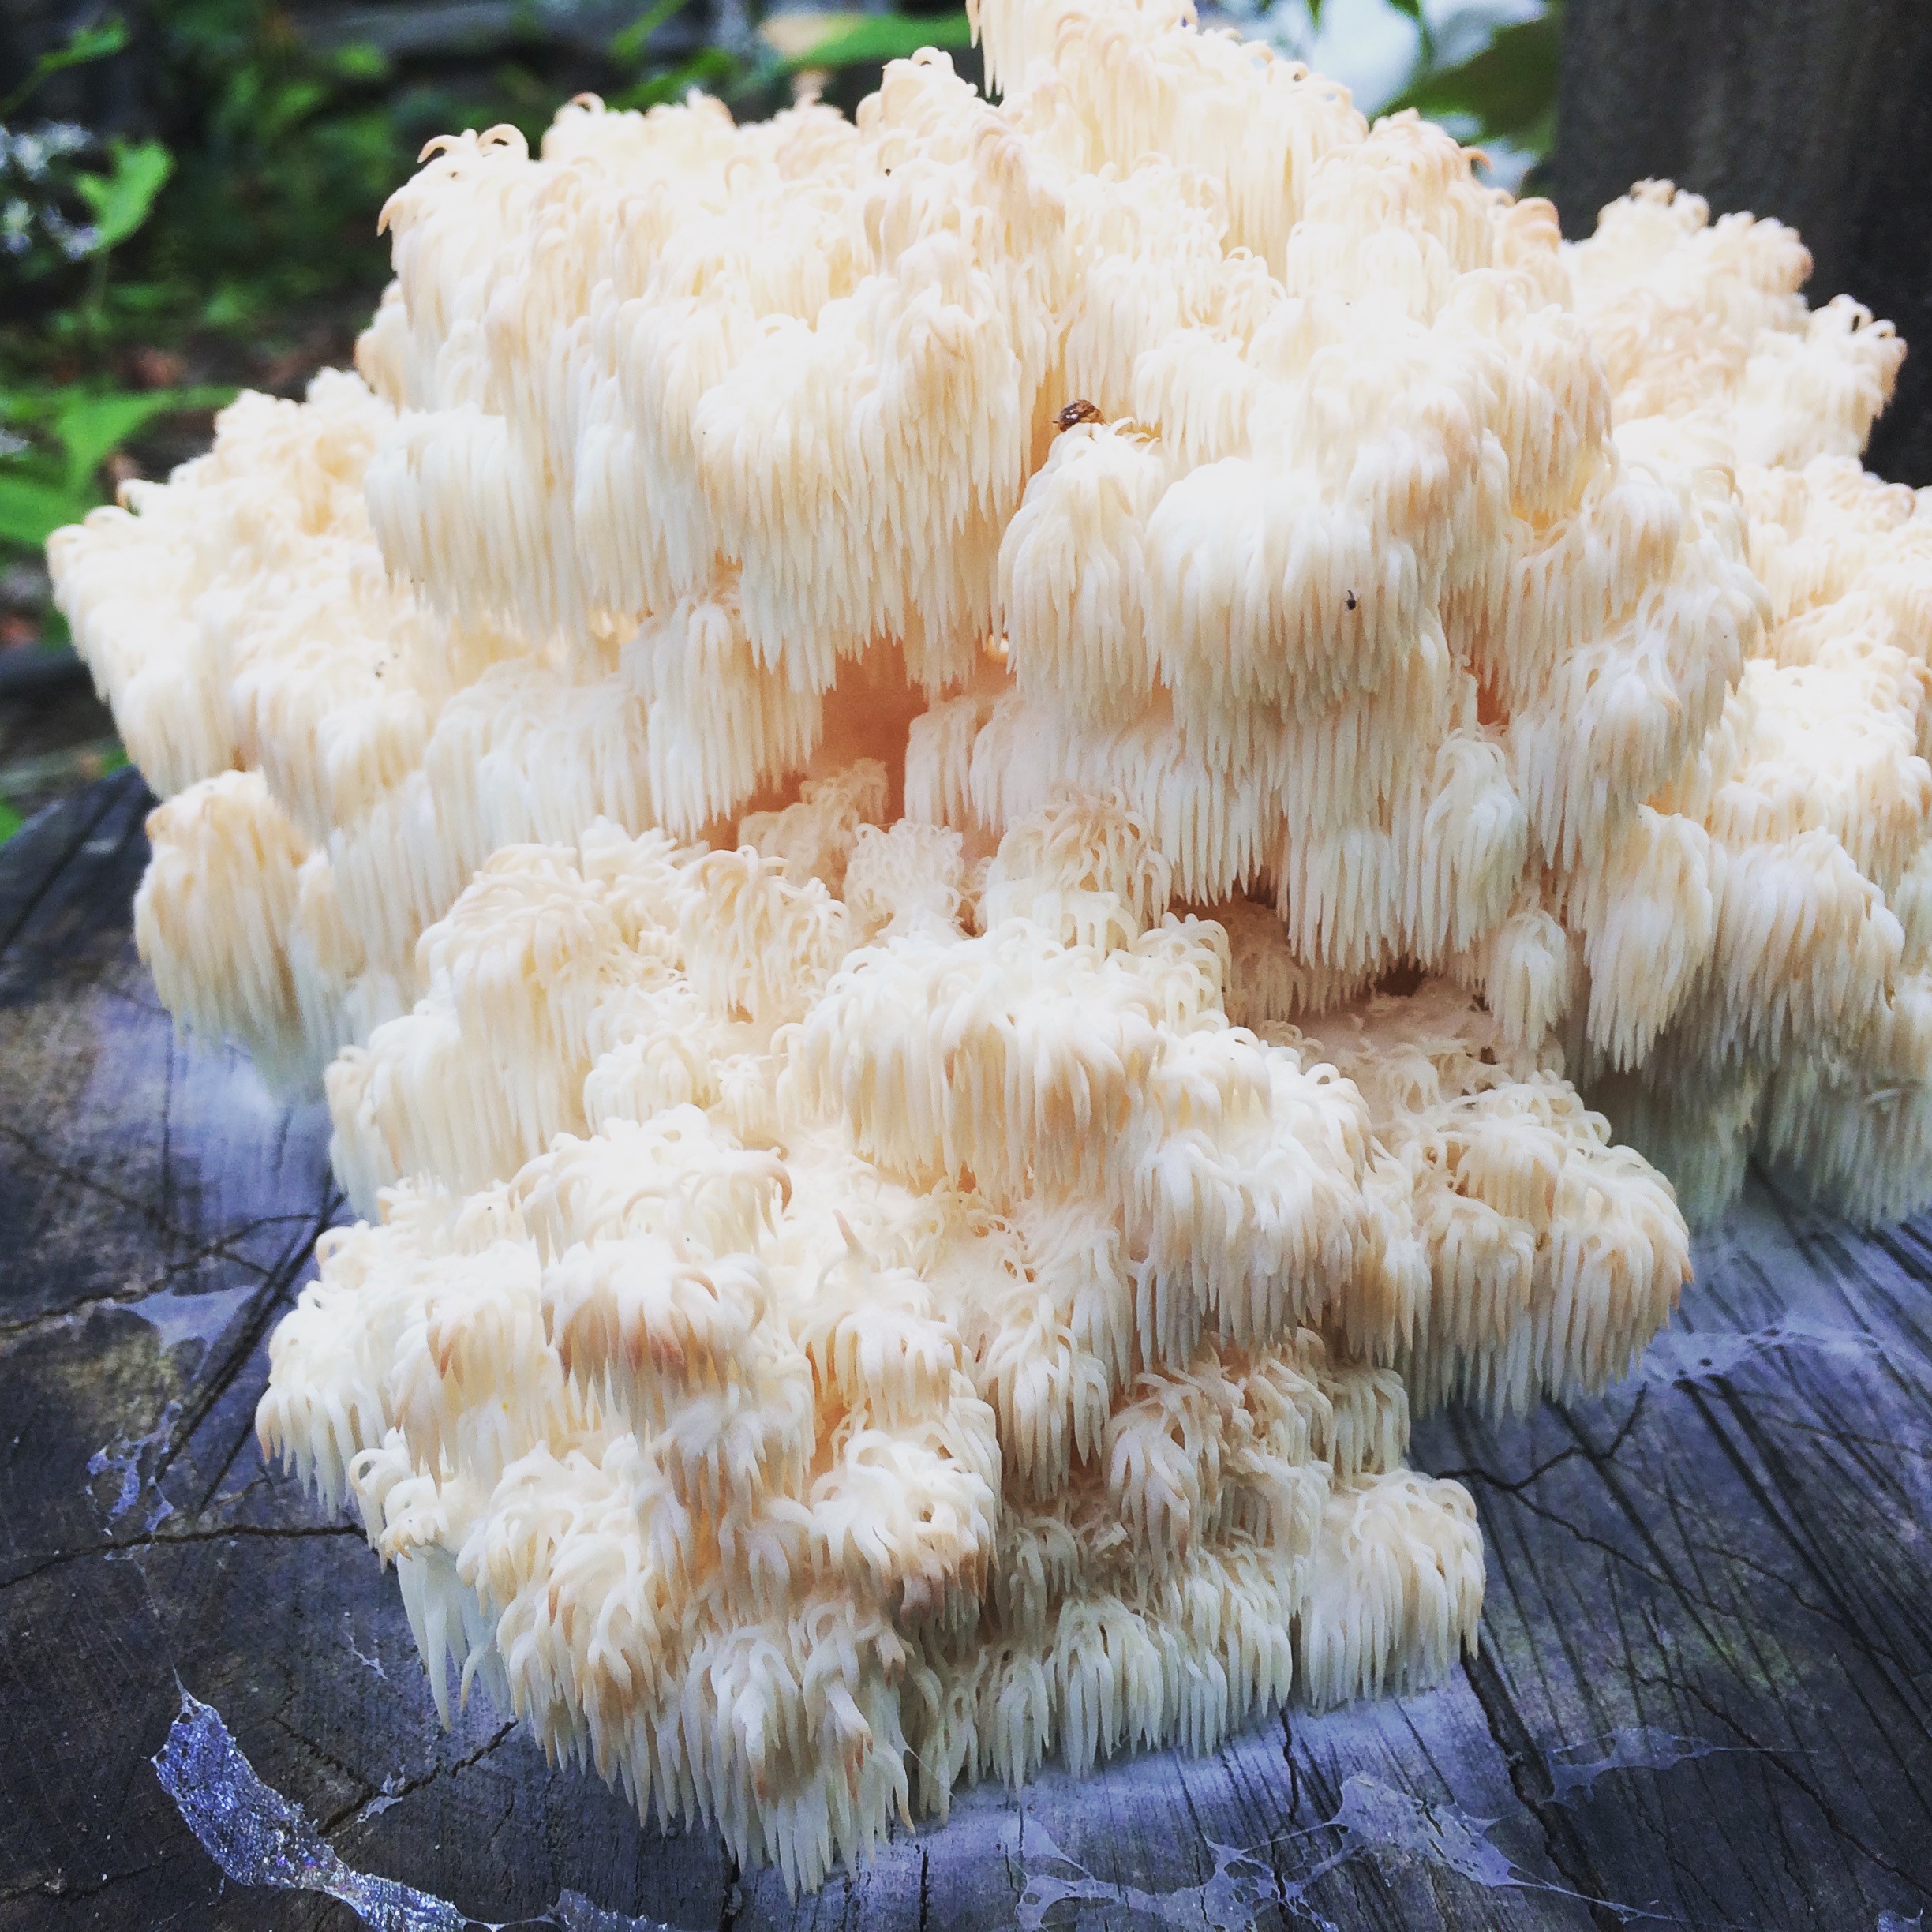 Lions mane should be harvested when teeth are about 1cm long and drooping downward.